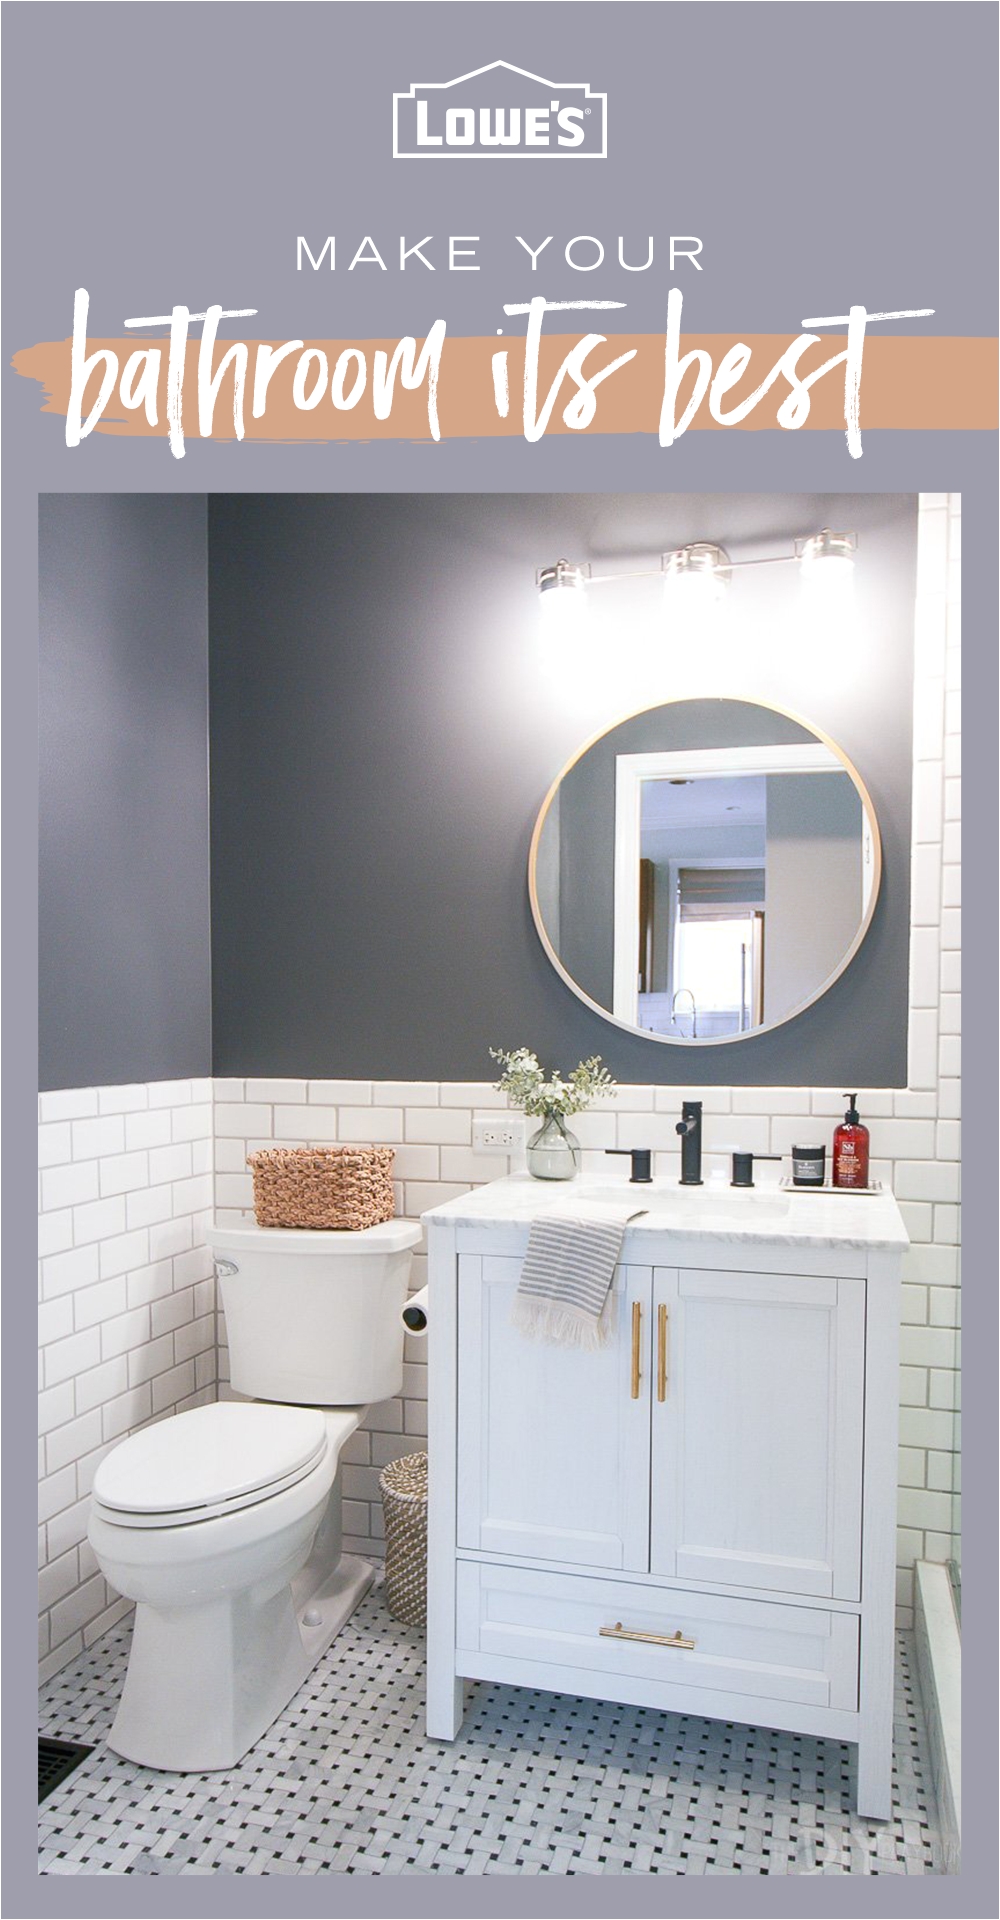 looking to beautify your bathroom lowes com has everything you need to upgrade and elevate tap the pin to learn more